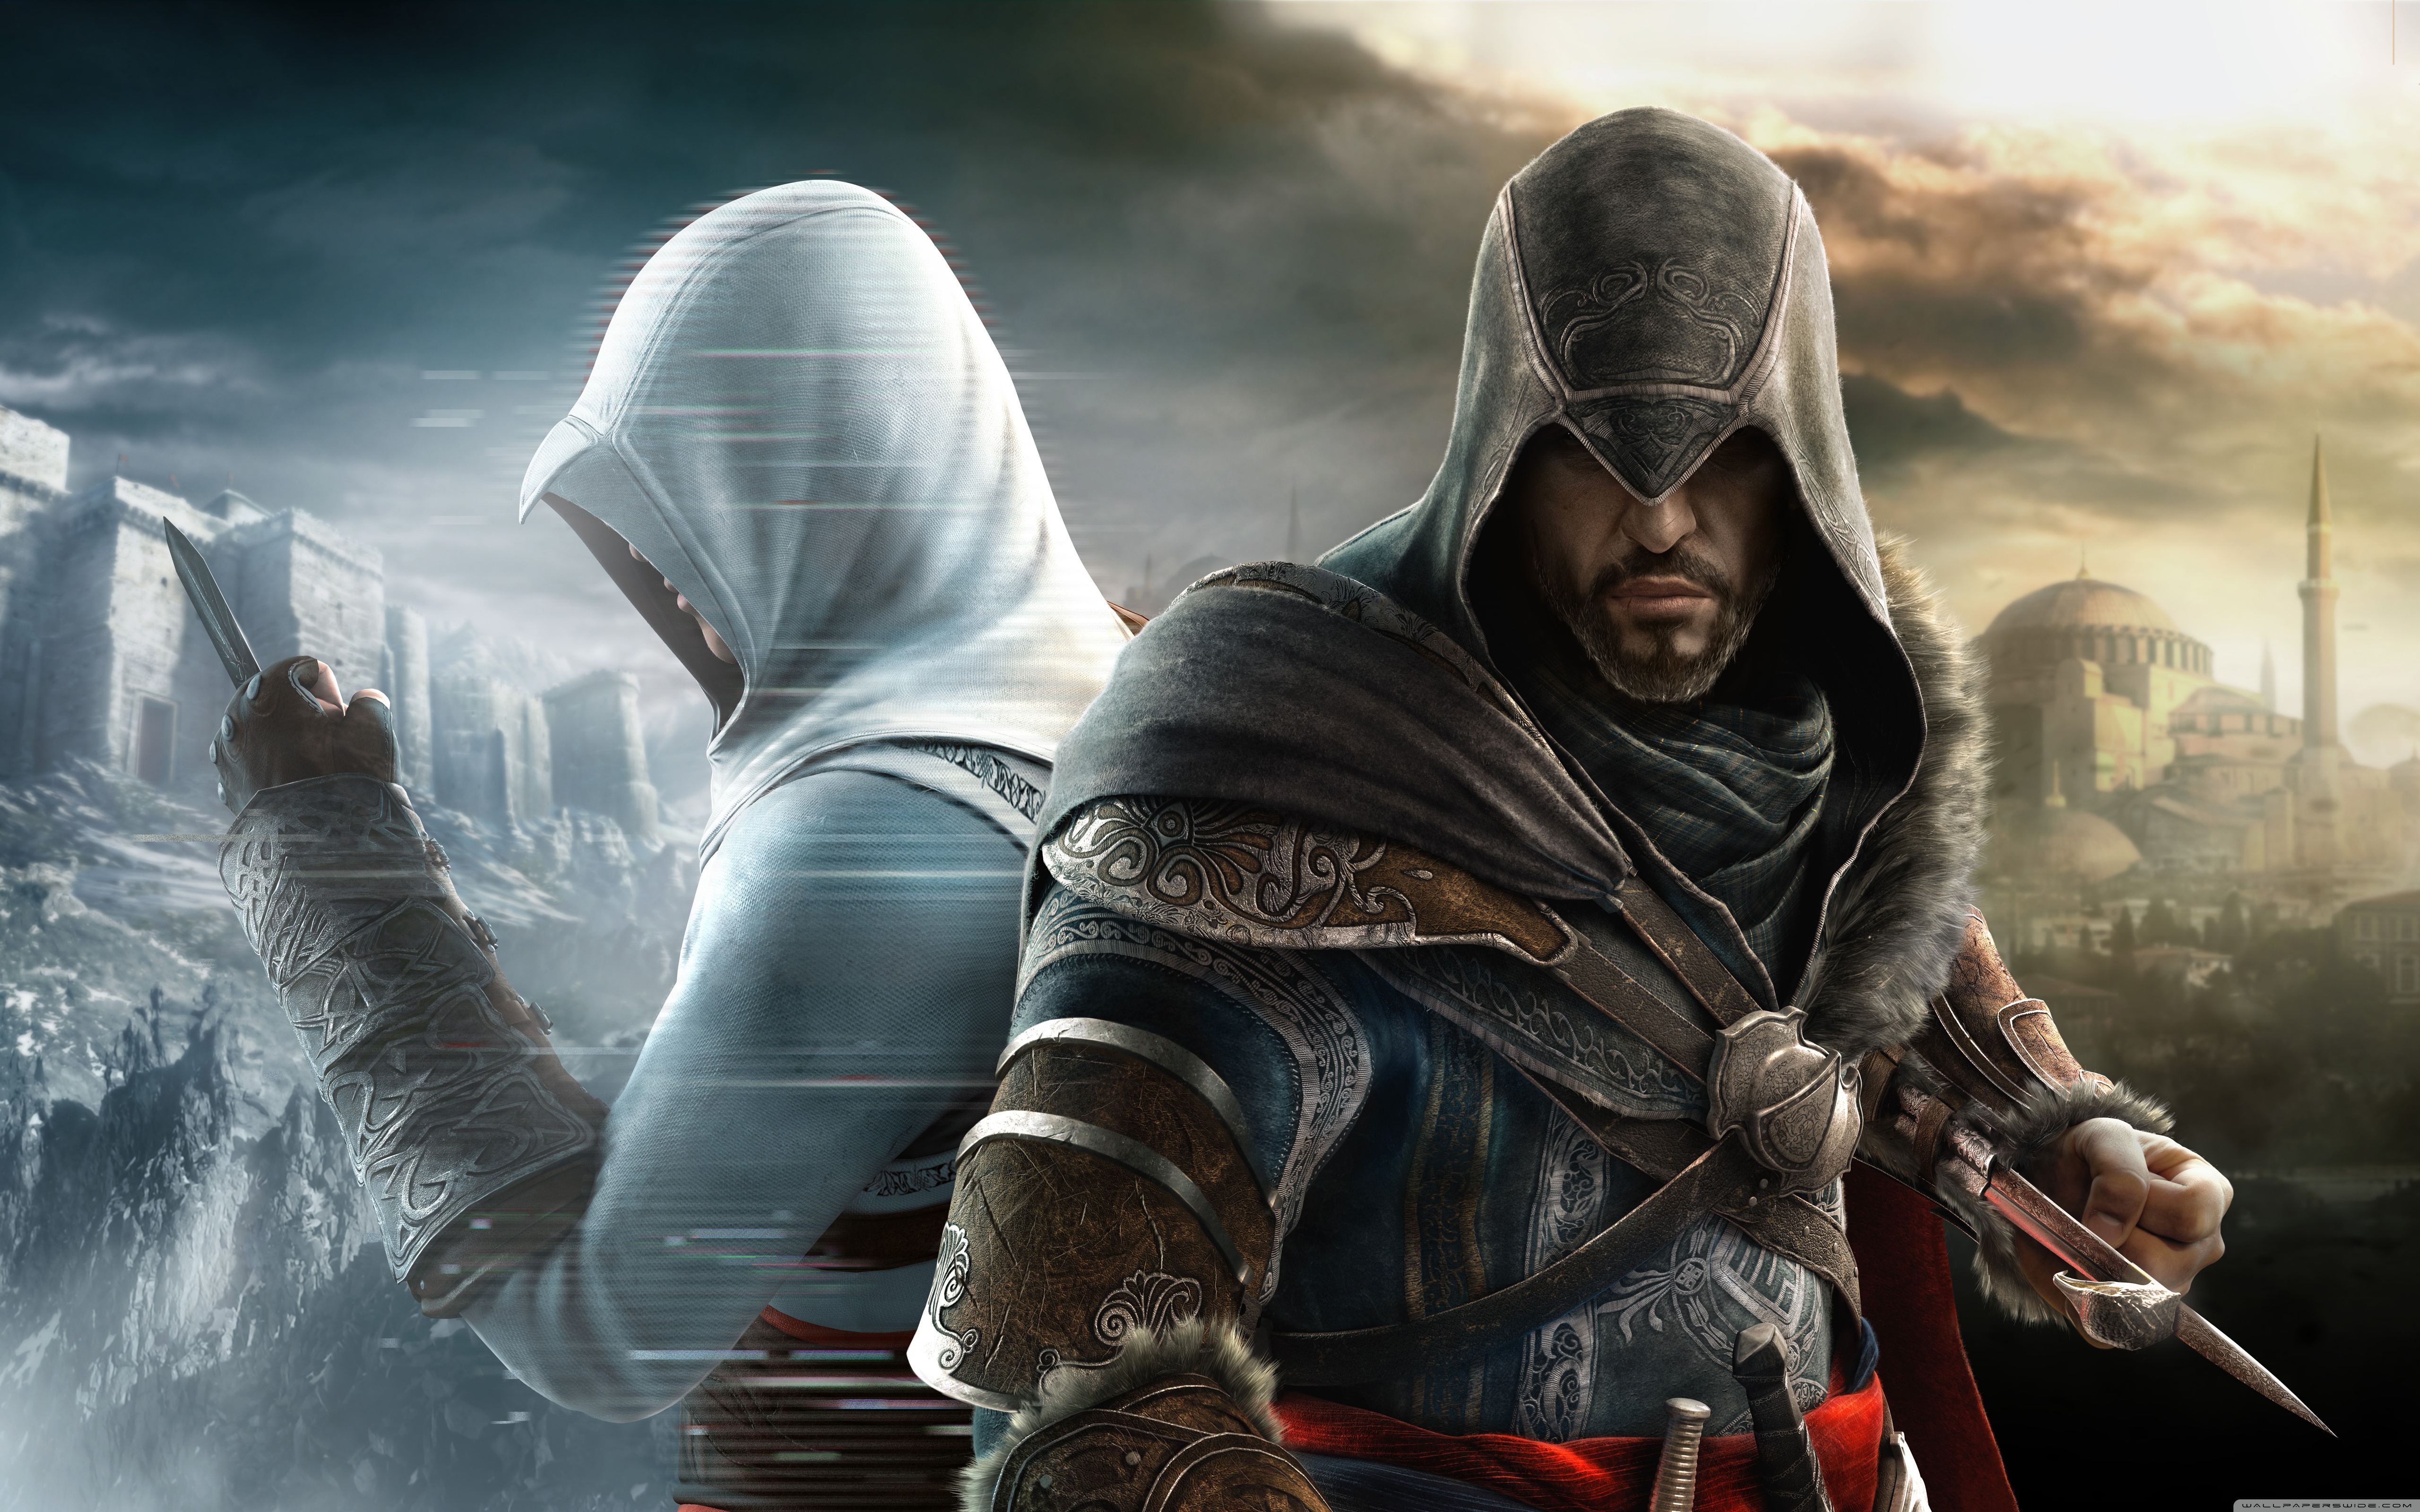 WallpapersWide com | Assassin's Creed HD Desktop Wallpapers for